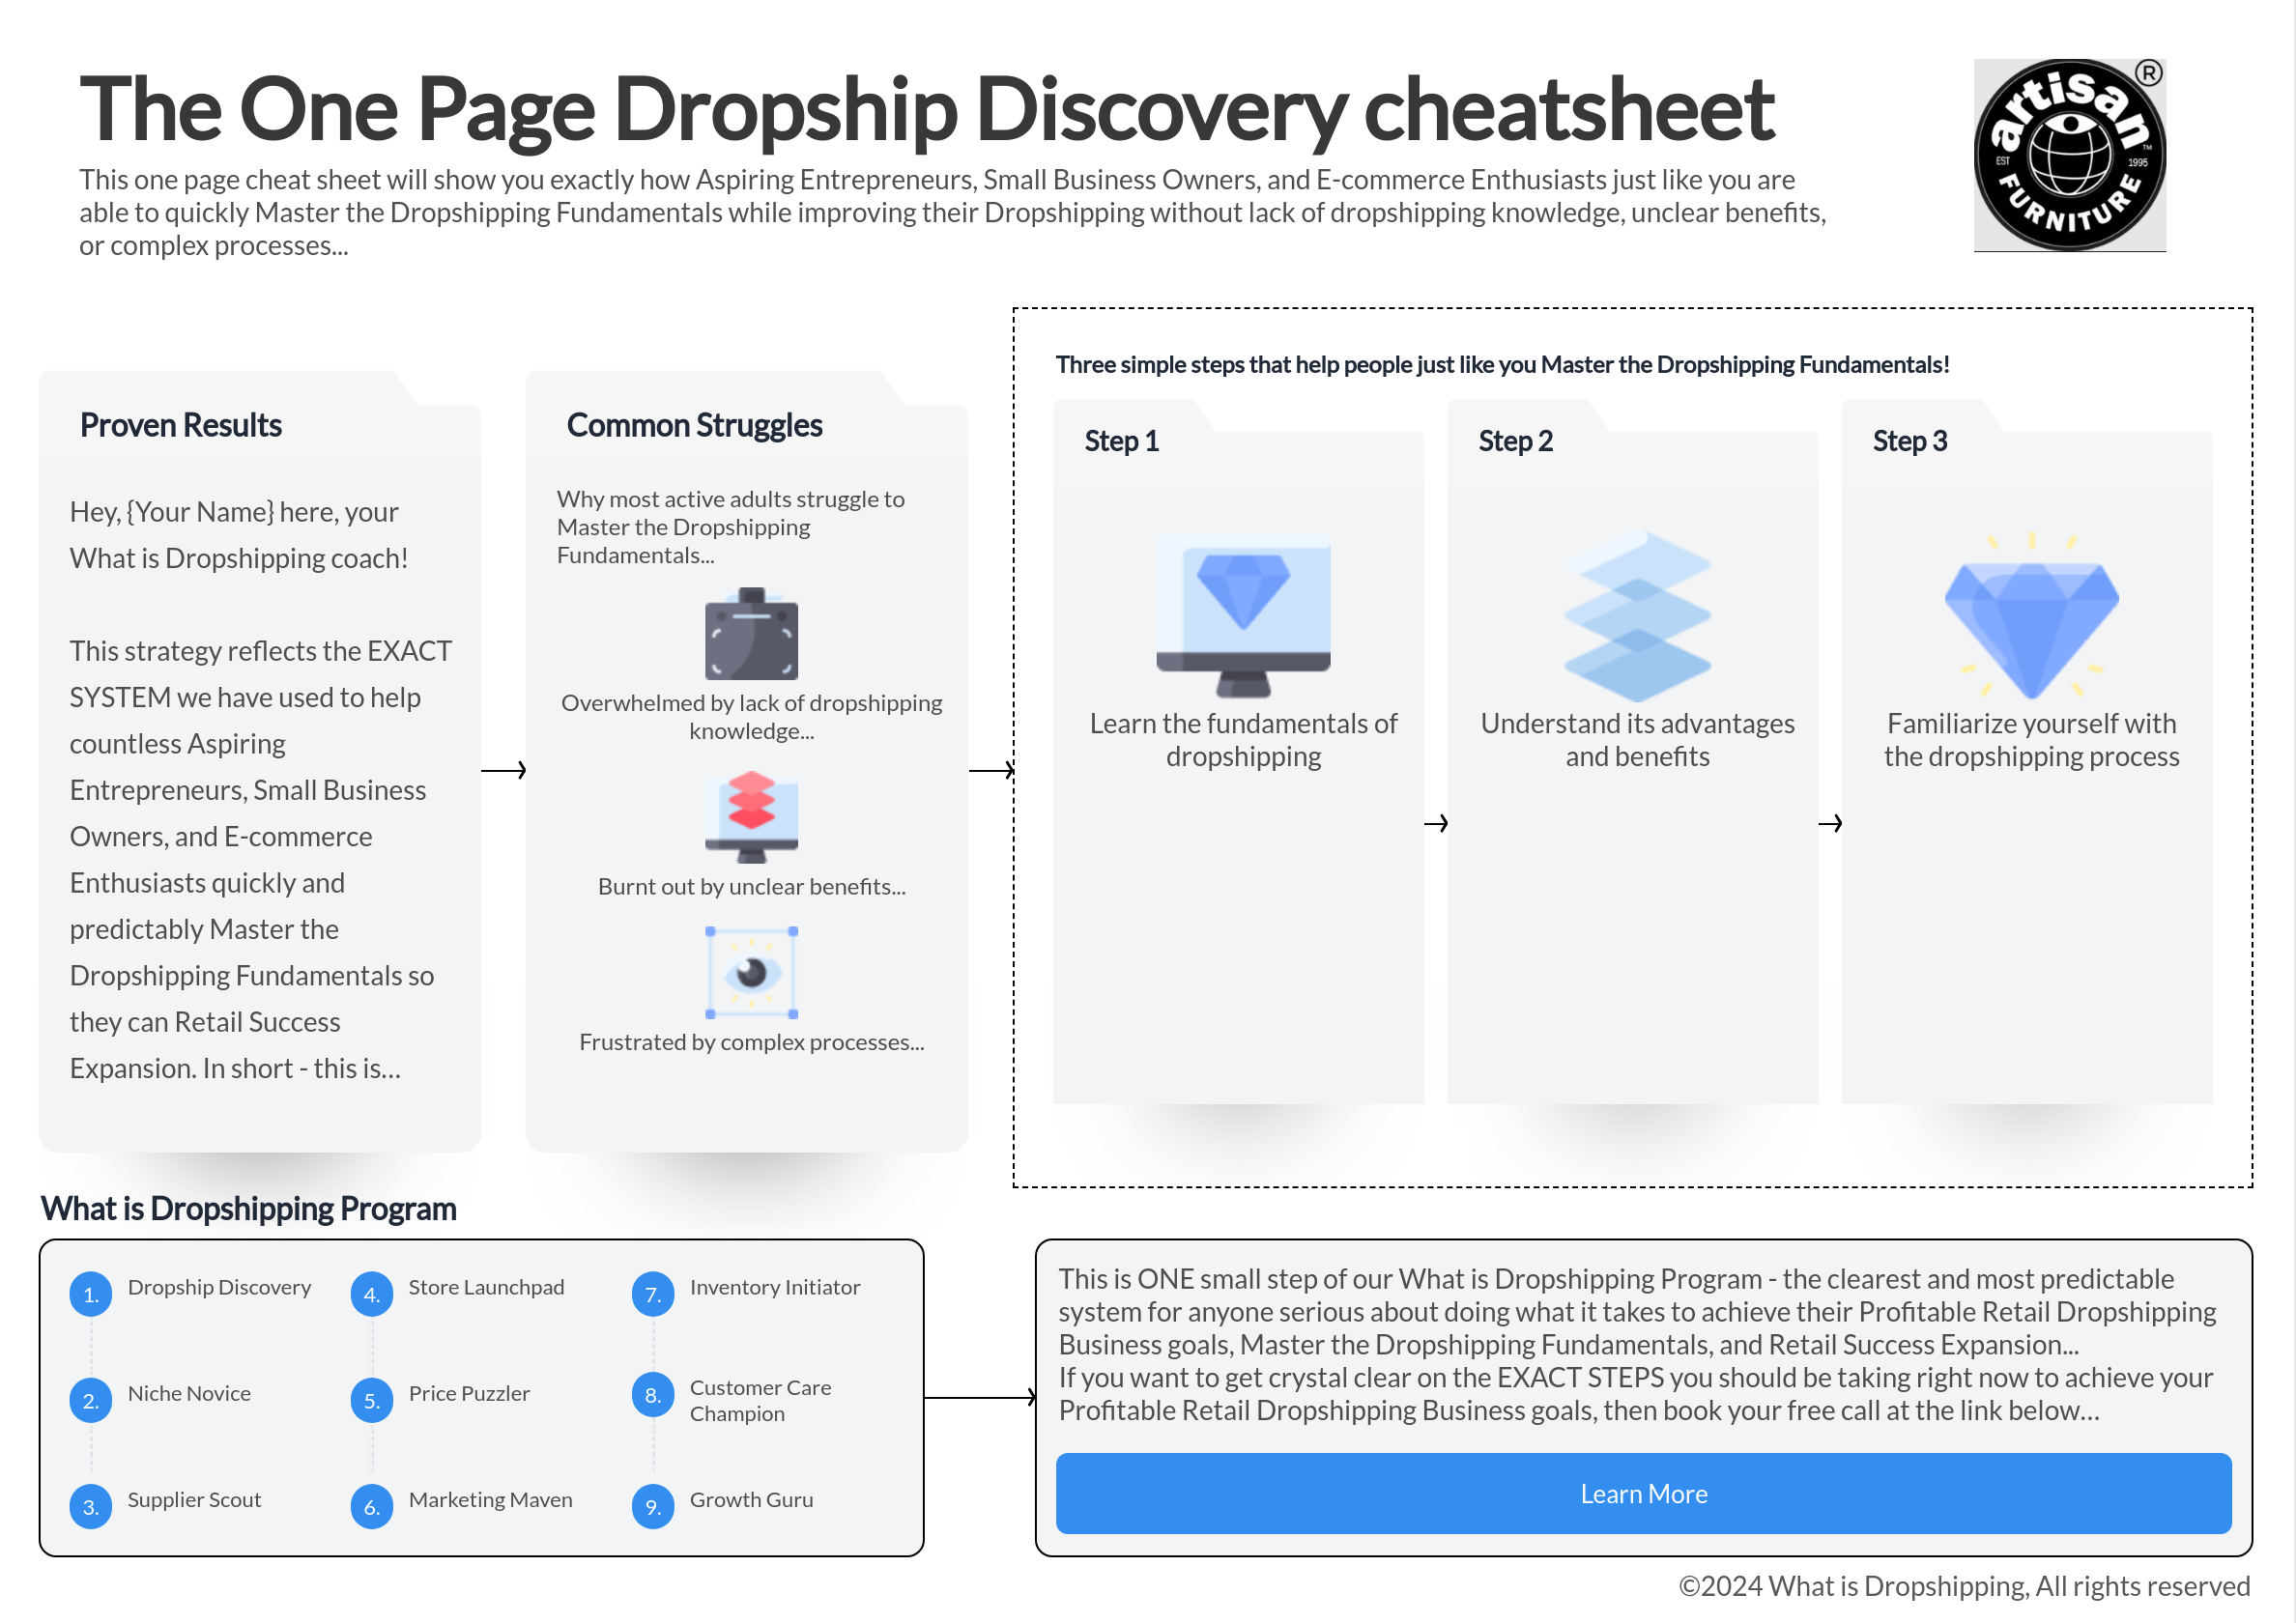 Dropshipping cheat sheet demonstrating business growth steps.